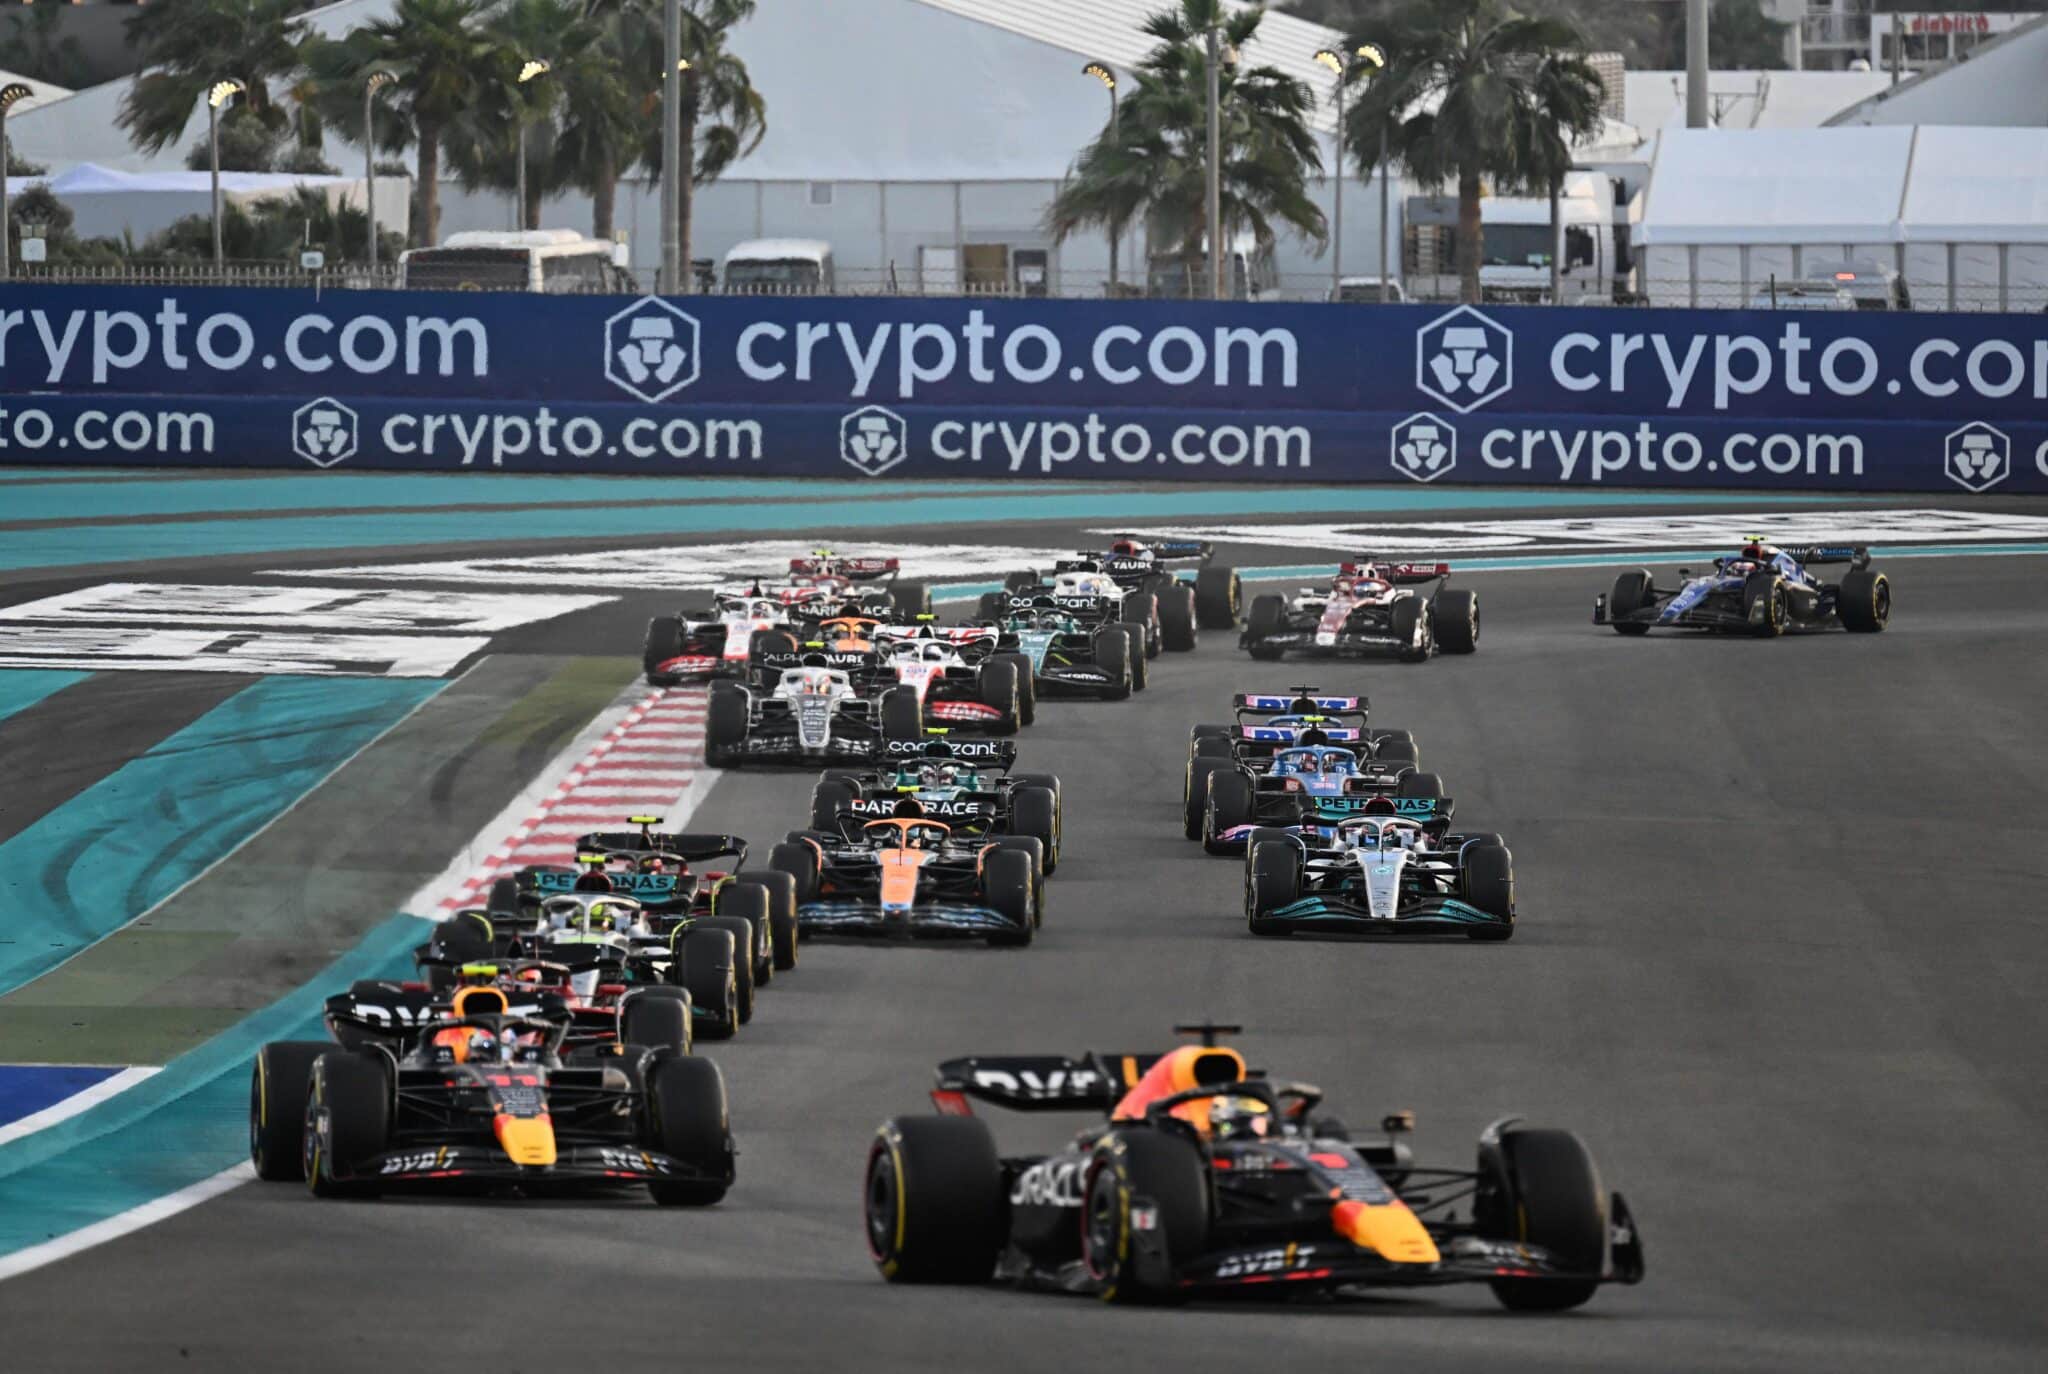 Drivers compete during the Abu Dhabi Formula One Grand Prix at the Yas Marina Circuit in the Emirati city of Abu Dhabi on November 20, 2022. (Photo by Karim Sahib / AFP) (Photo by KARIM SAHIB/AFP via Getty Images)